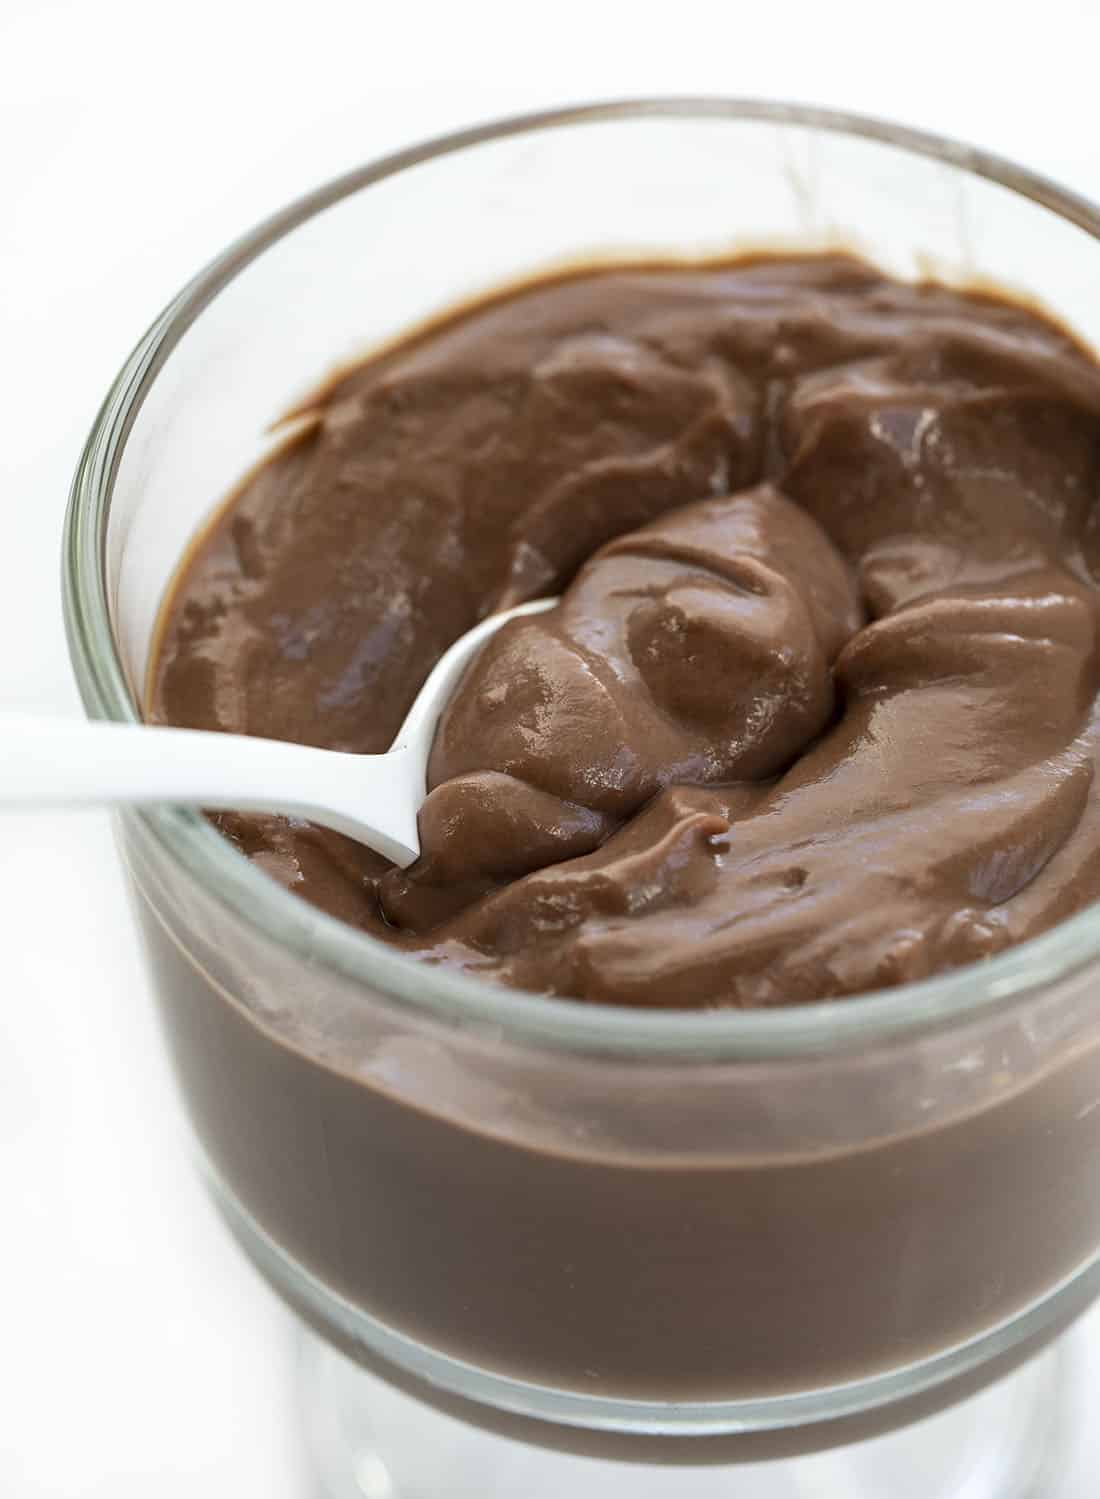 Spoon in Homemade Chocolate Pudding